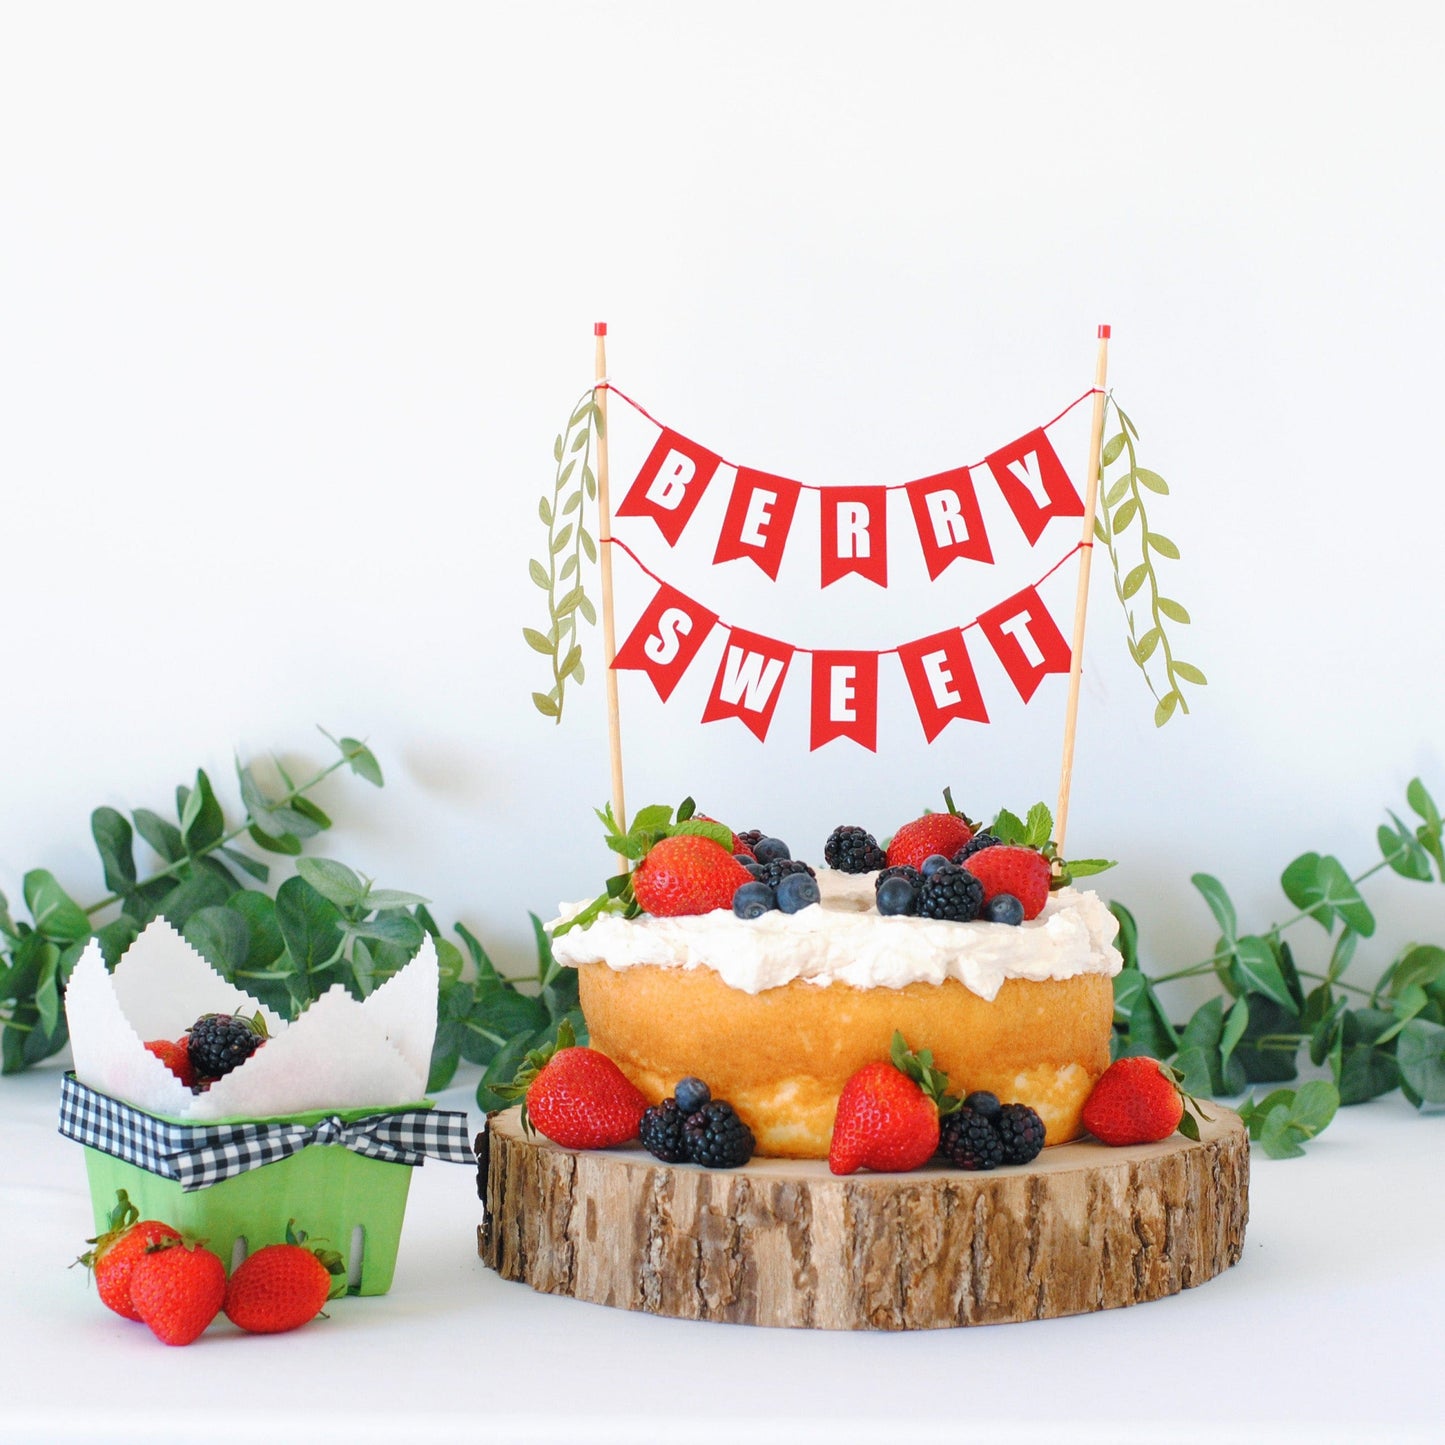 
                  
                    Berry Sweet cake topper for a berry themed party or shower
                  
                